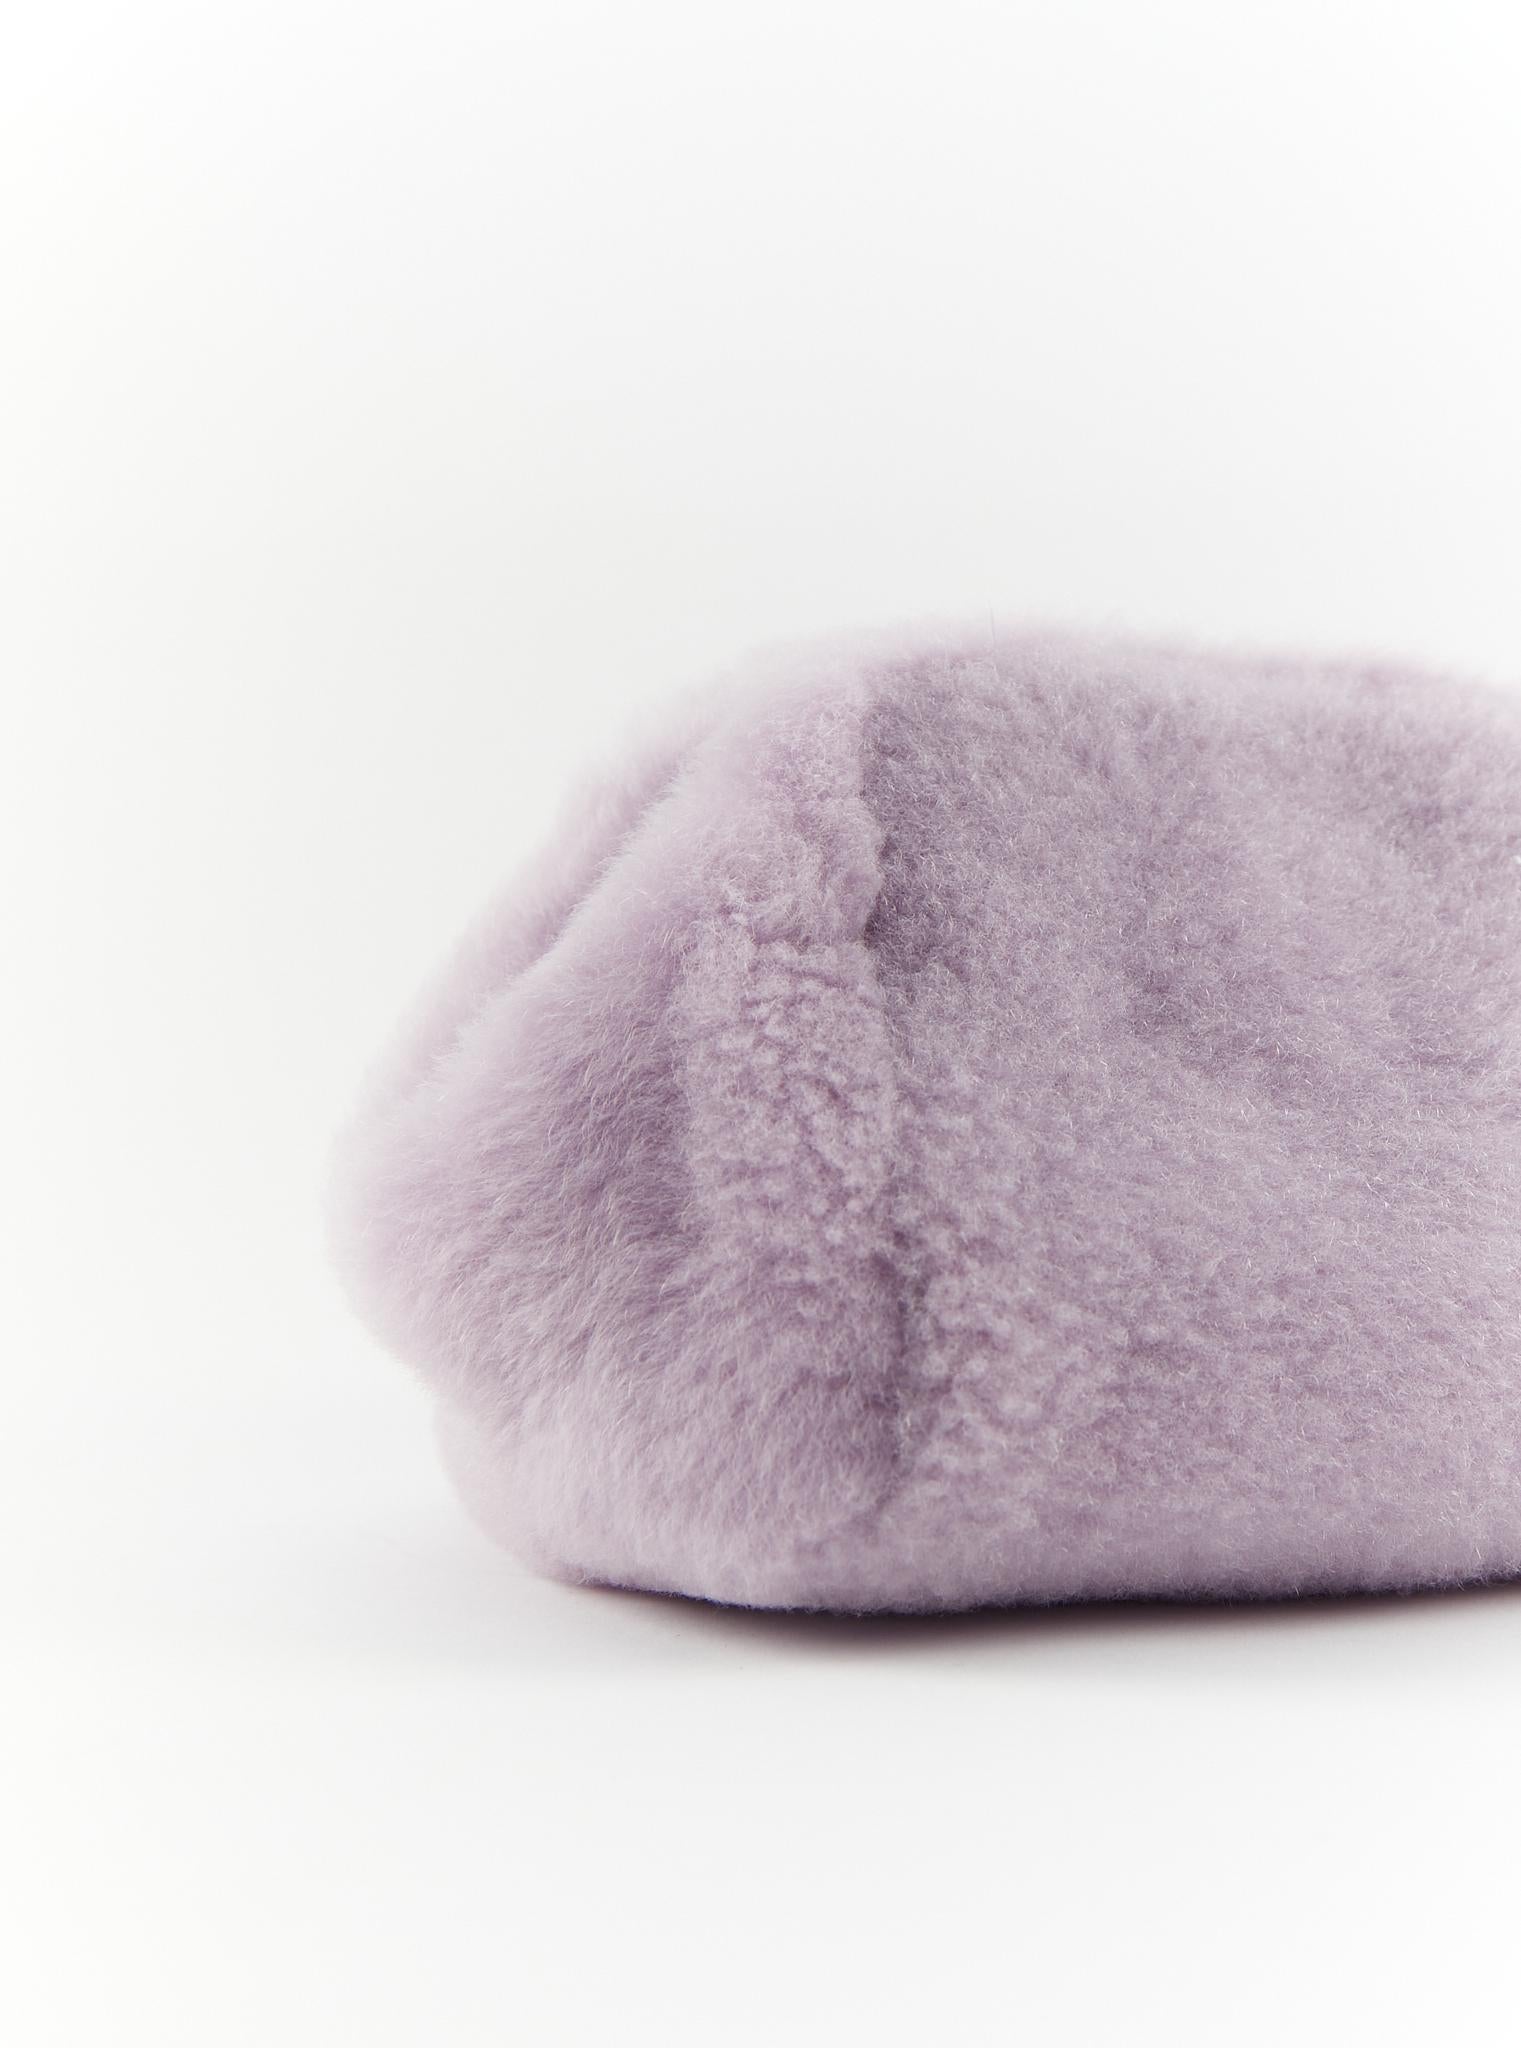 LORO PIANA SHEARLING CLUTCH Lilac In New Condition For Sale In London, GB